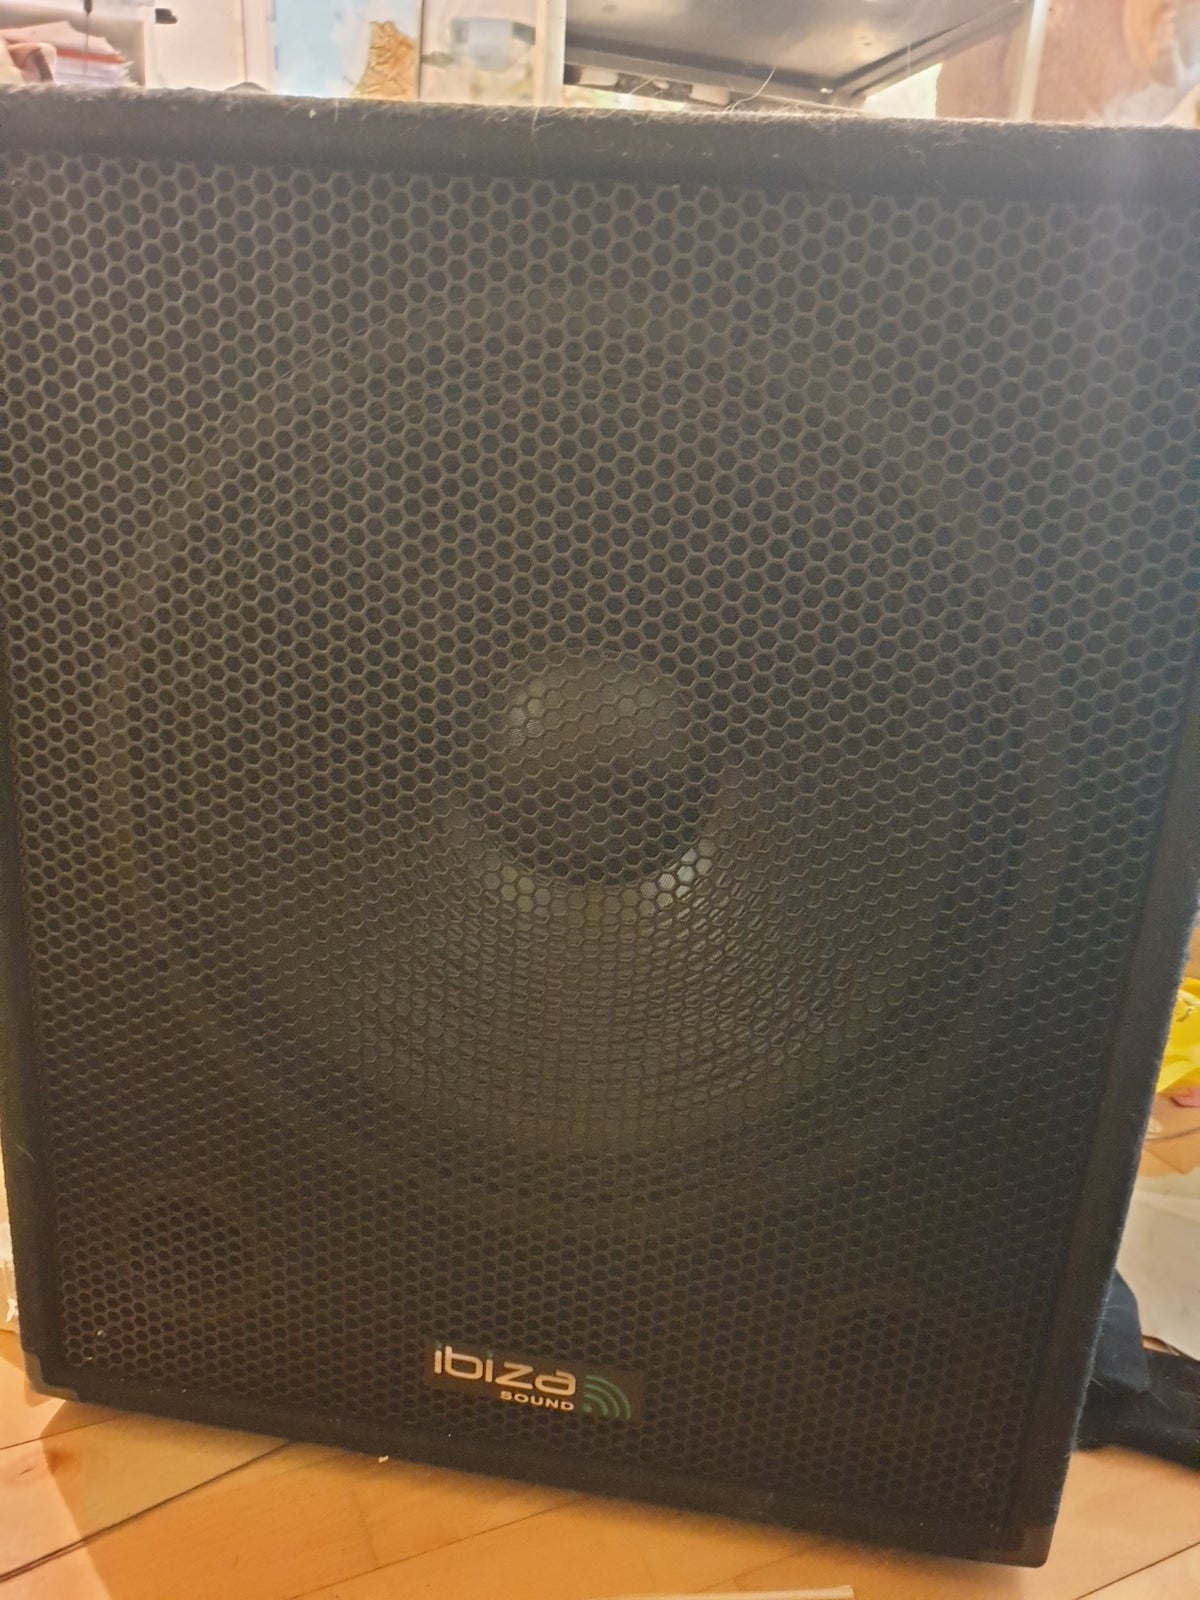 Subwoofer, Andet, Ibiza SUB15A